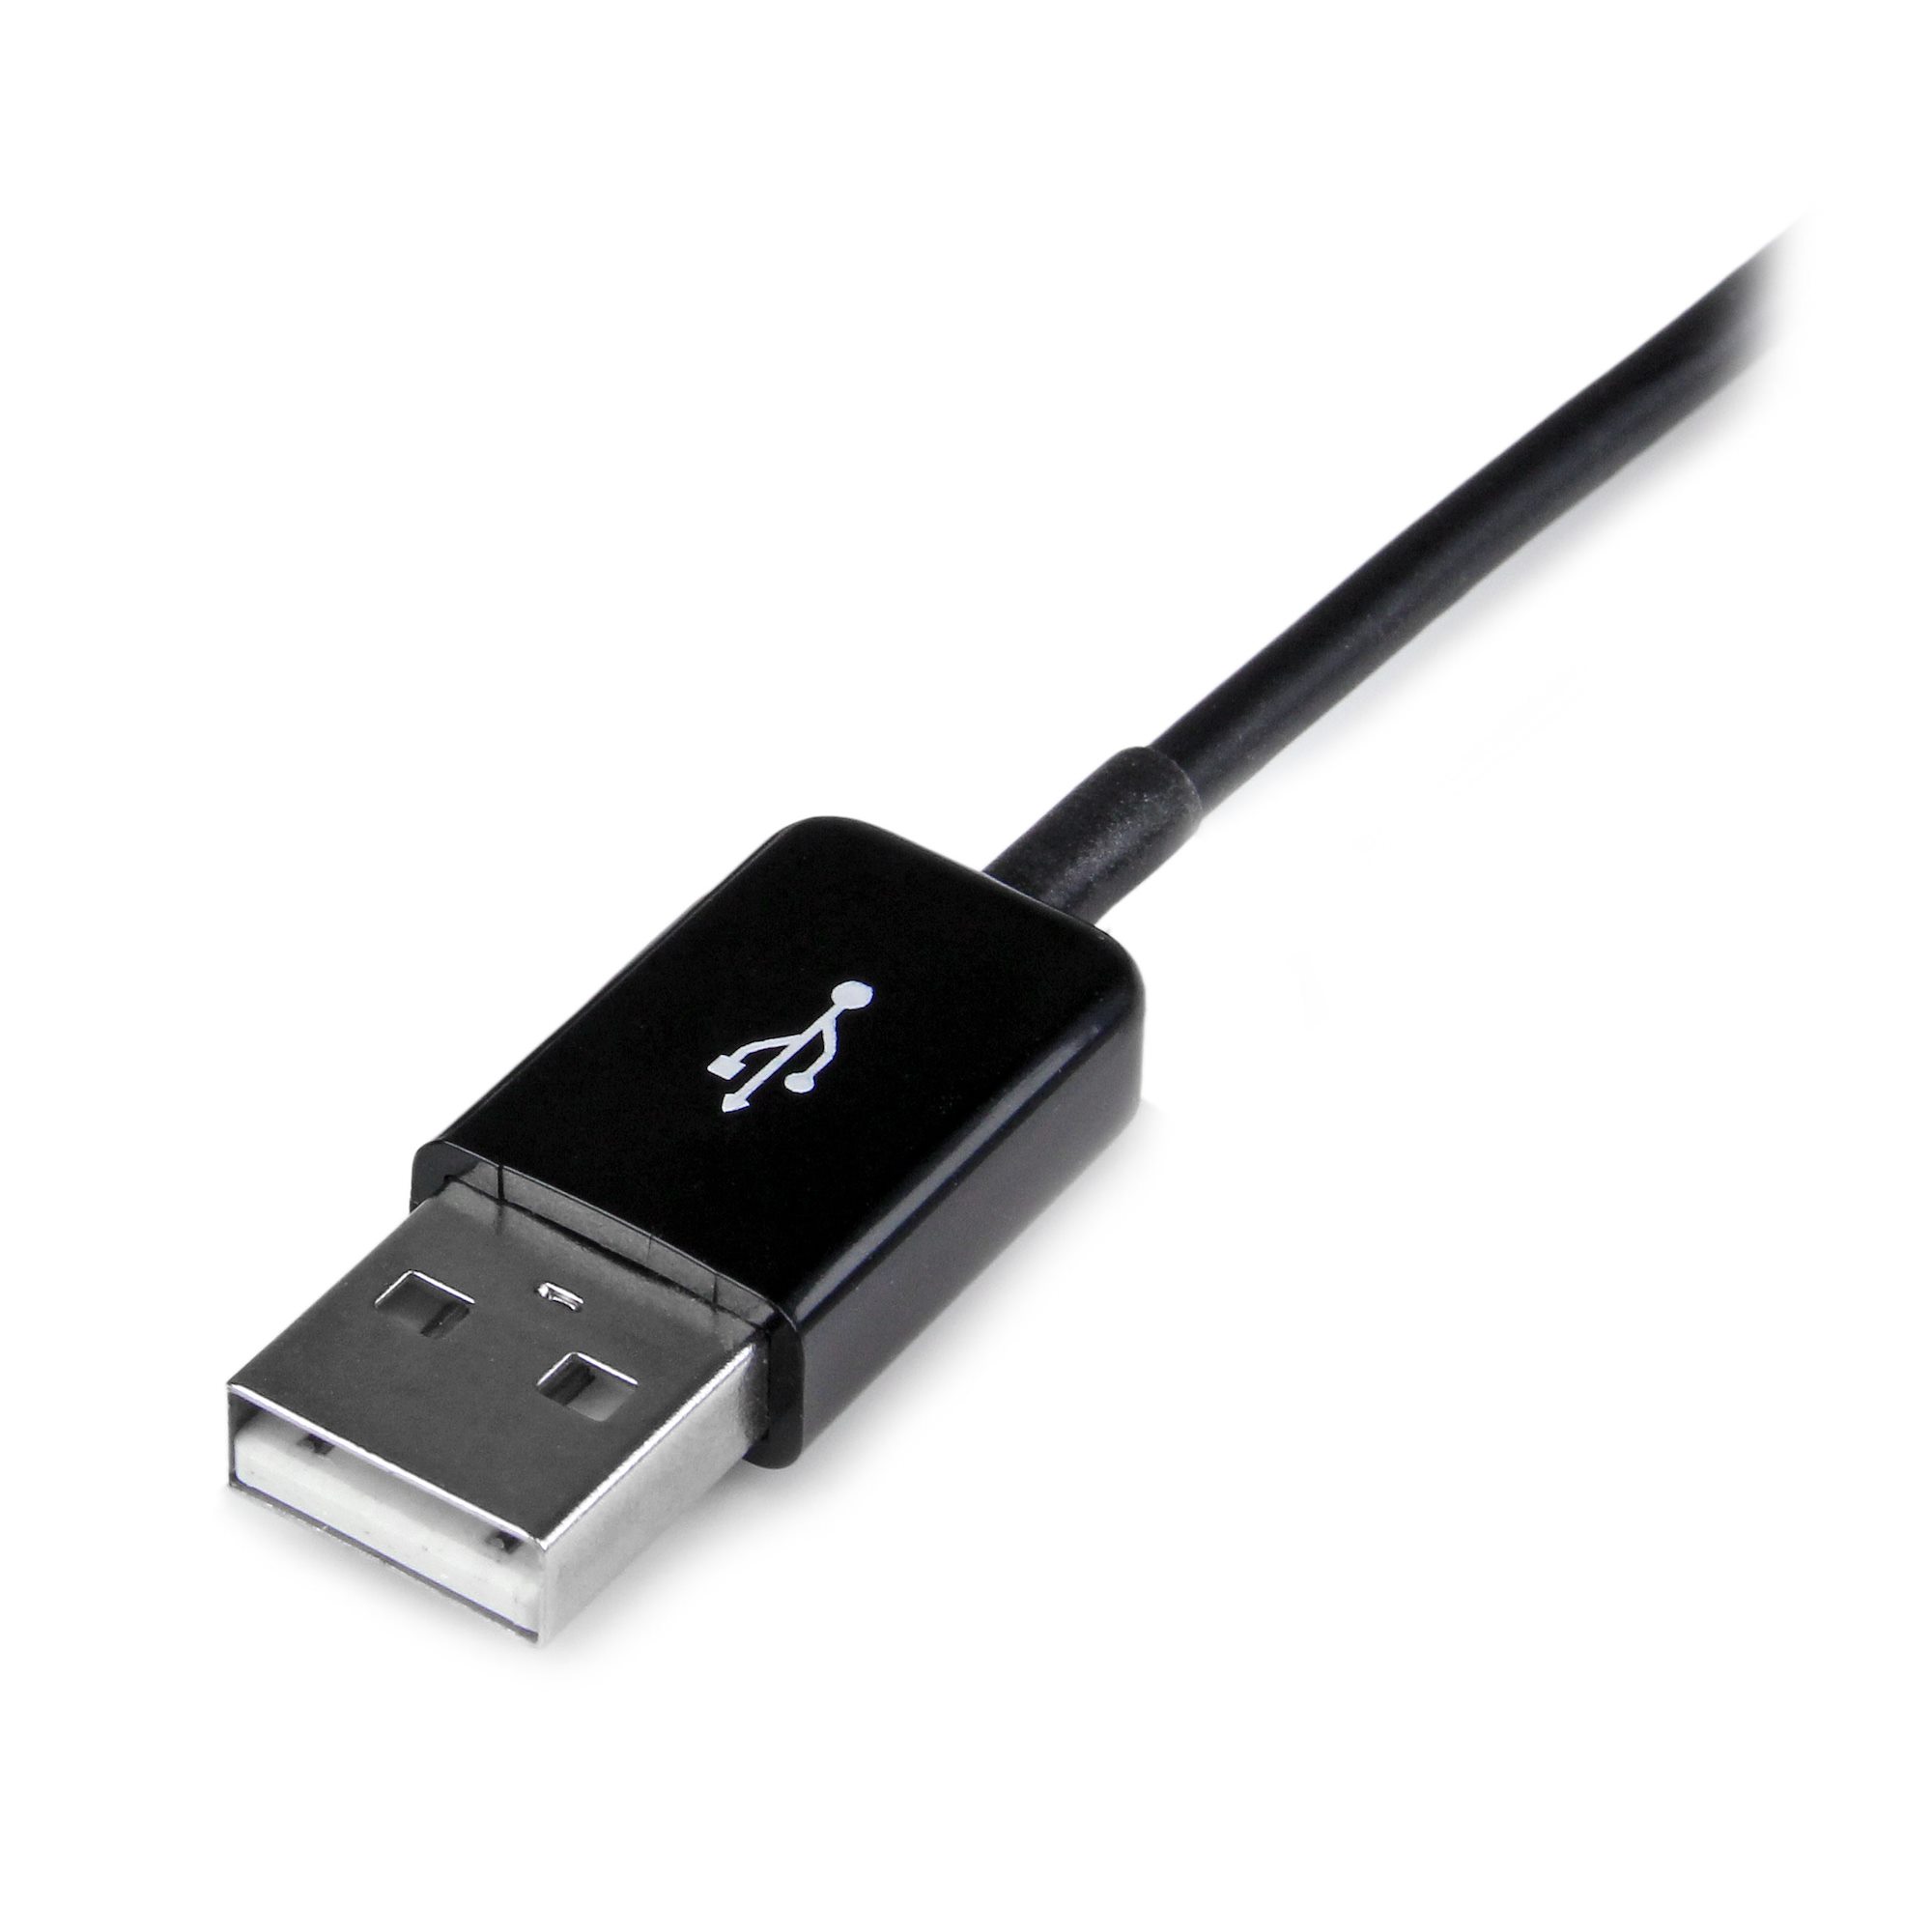 2m USB Cable for Samsung Galaxy Tab - USB Adapters (USB | StarTech.com